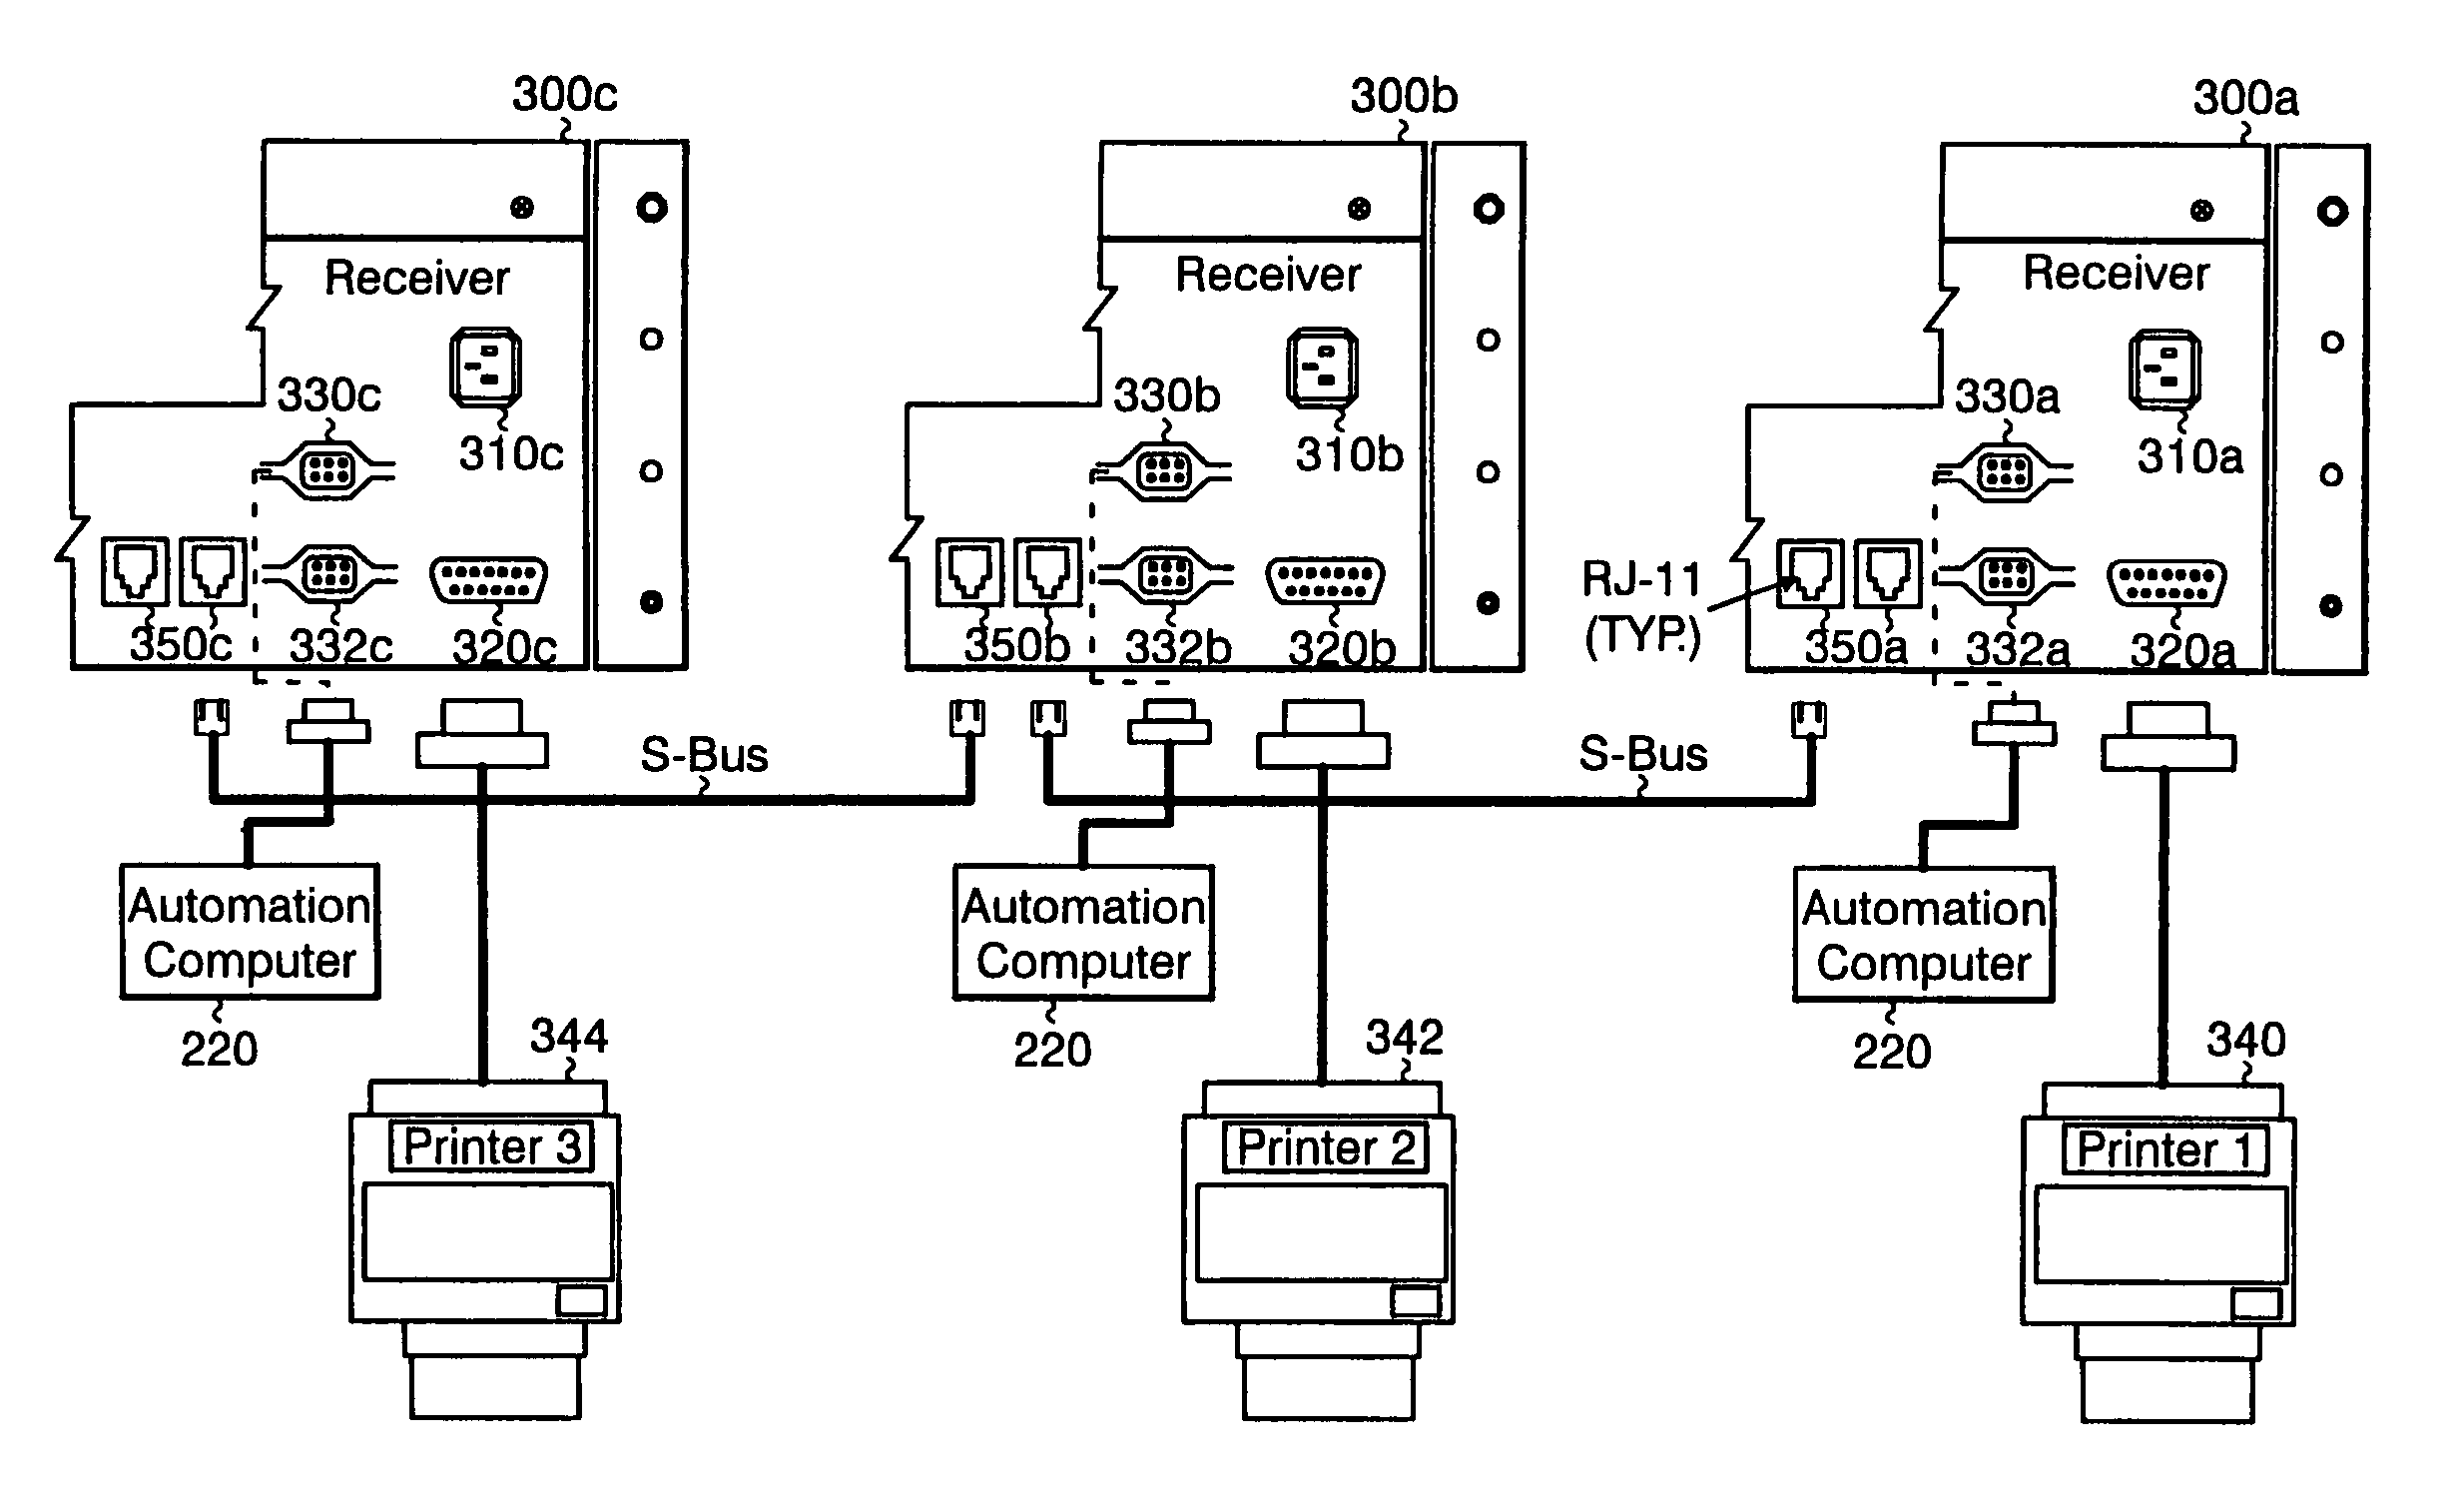 Method and system of re-directing and backing up security system data at a receiver